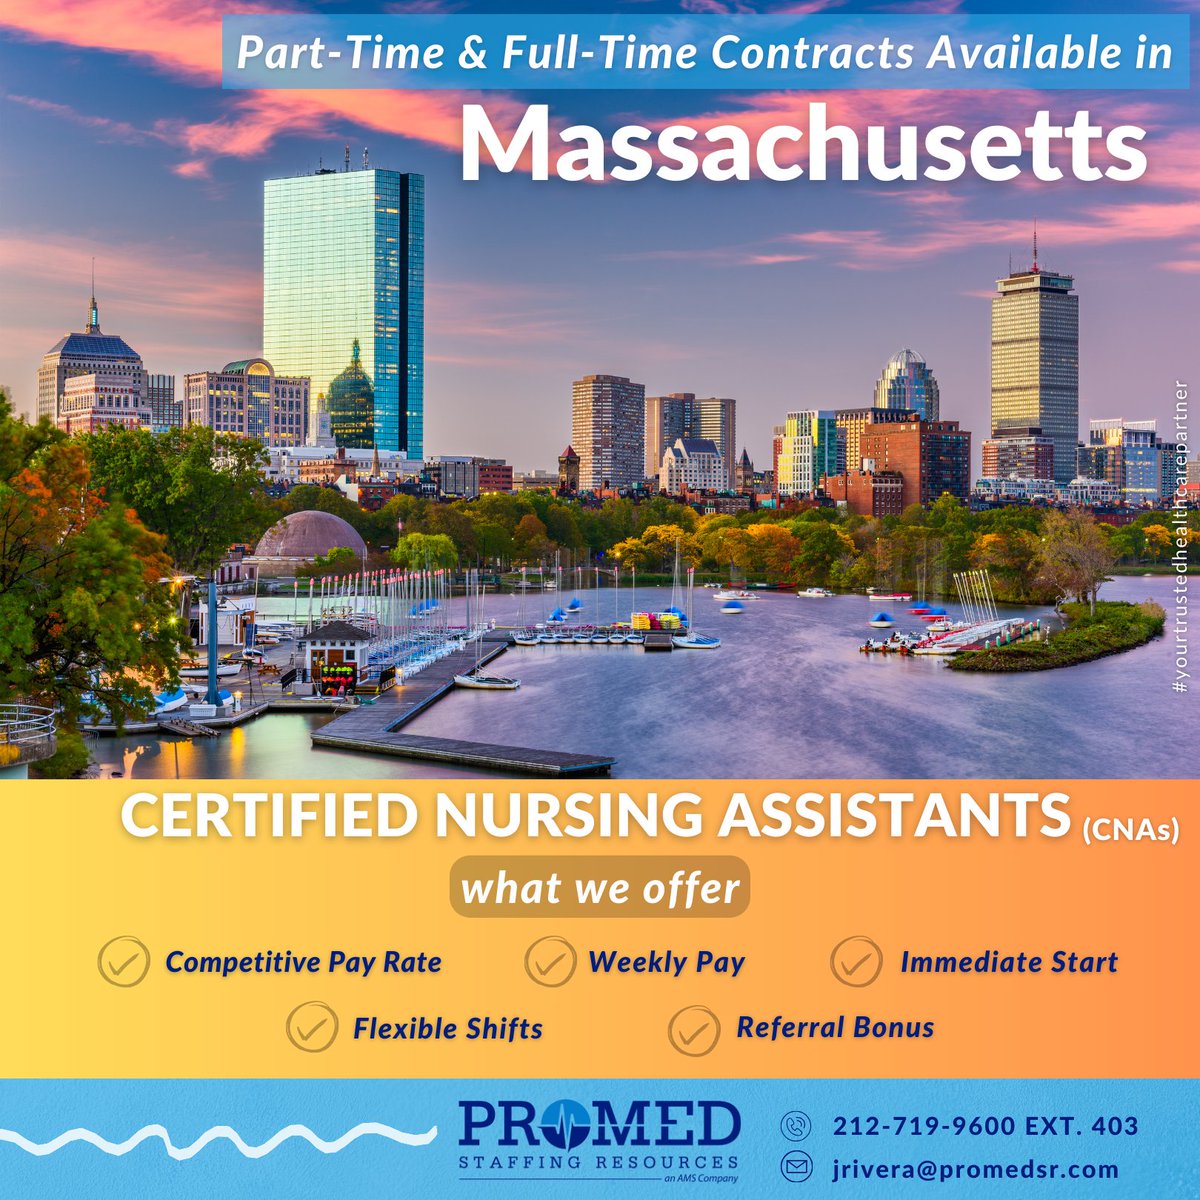 Promed Staffing Resources is now #hiring experienced #CNAs to work in #longtermcarefacilities across #massachusetts. Contact Jorell Rivera at (212) 719-9600 or email your resume to jrivera@promedsr.com

#certifiednursingassisstant #recruitmentagency #cnajobs #promed #promedsr